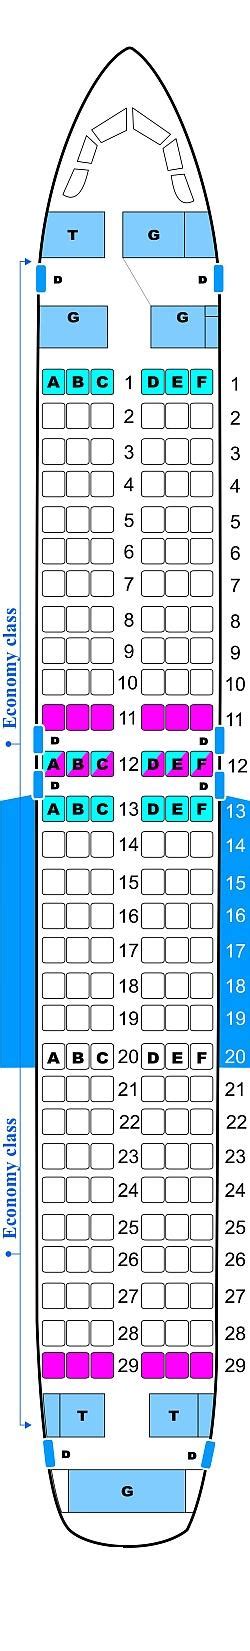 United Airlines Seat Map Airbus A My Bios